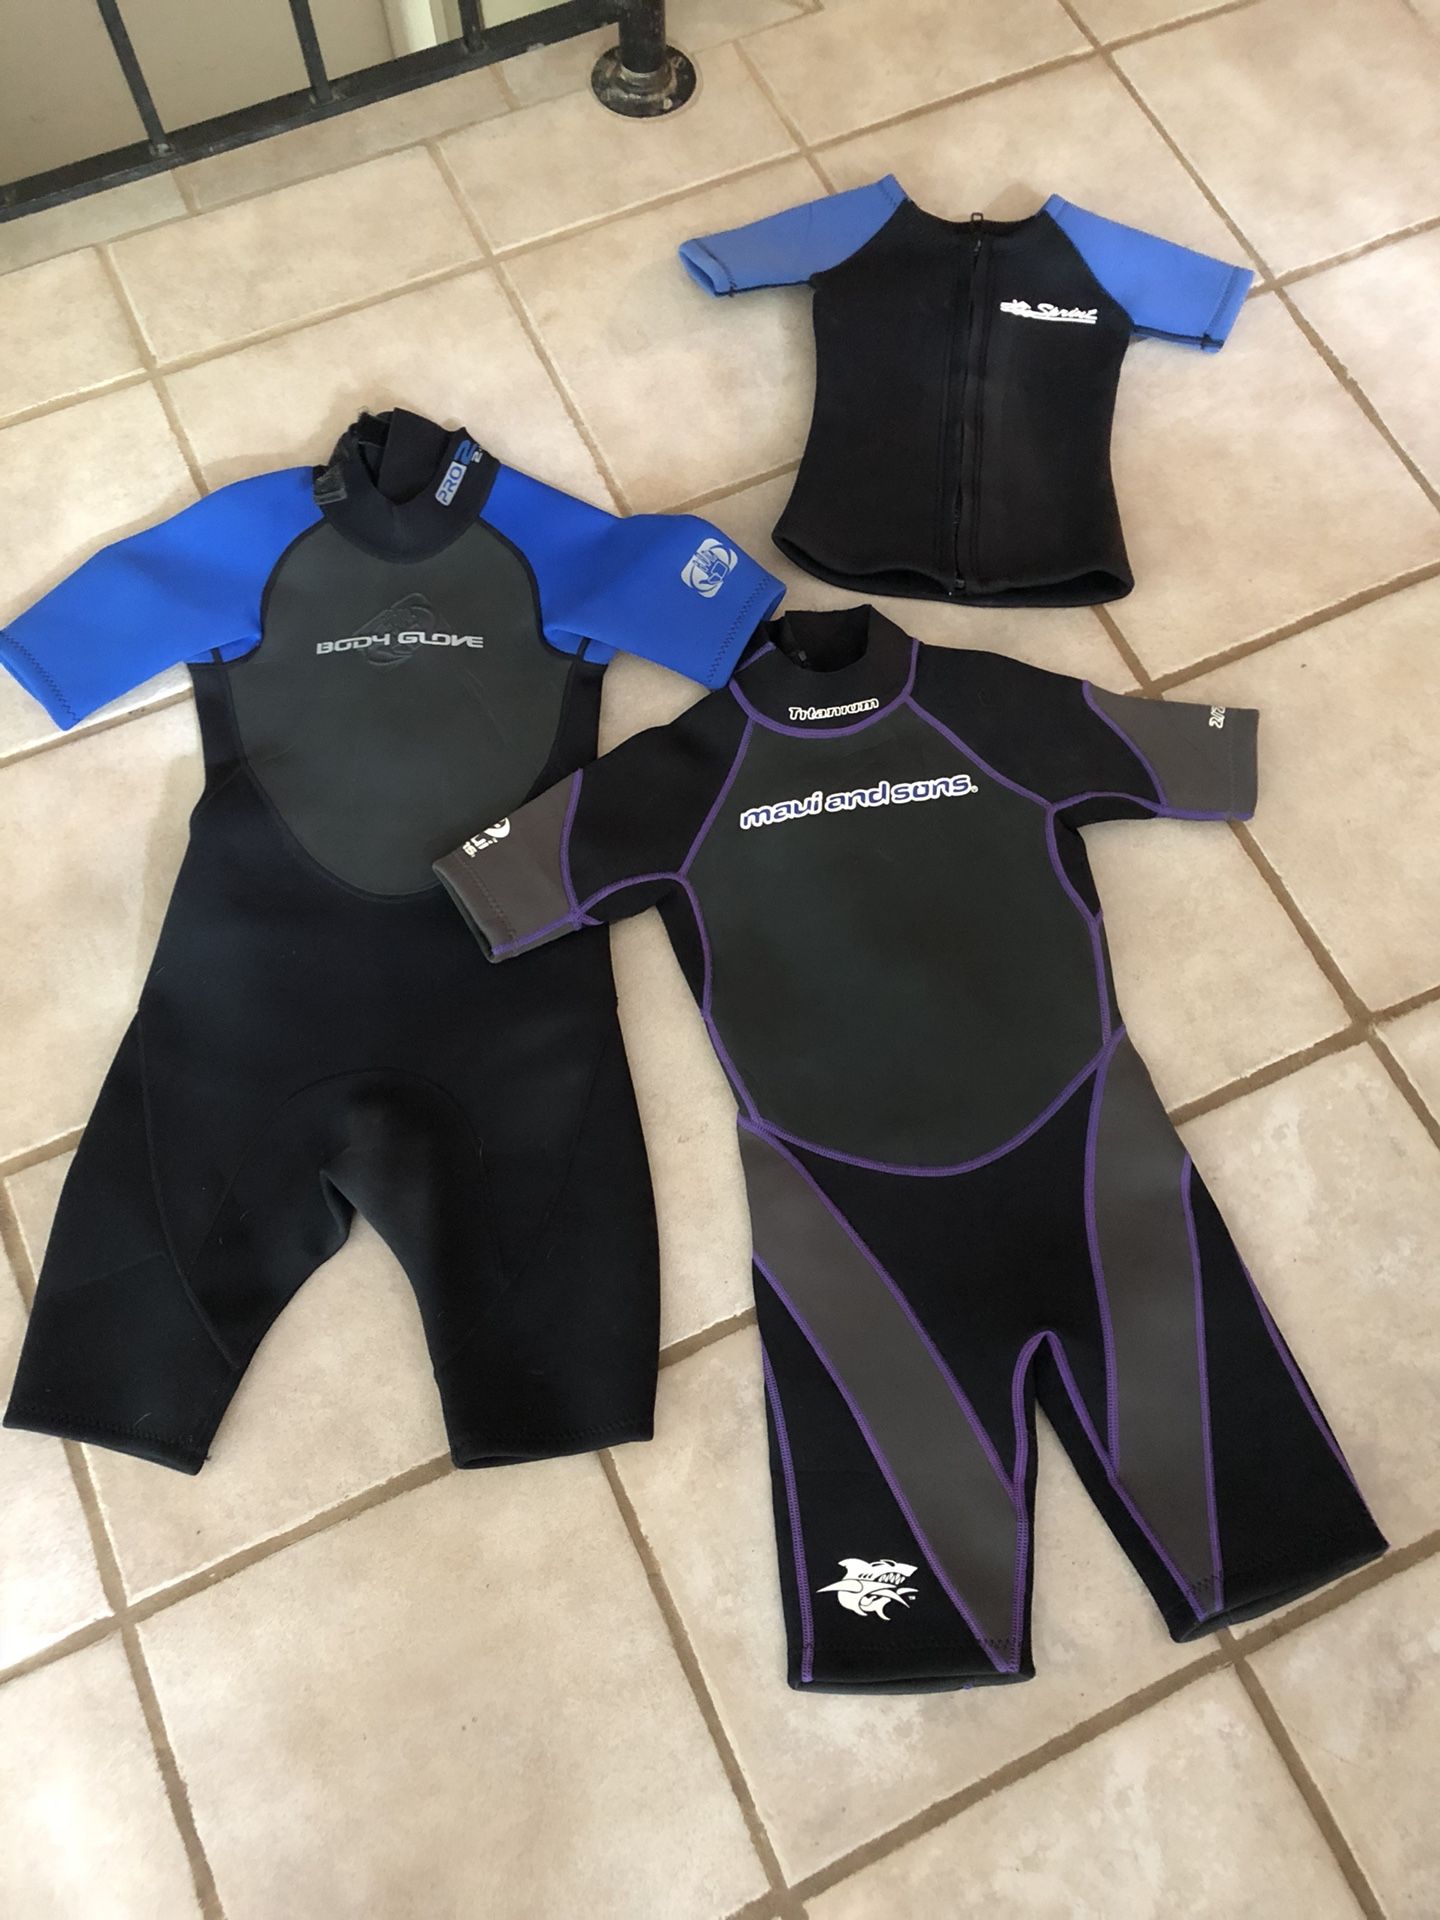 Wet suits/Life jackets